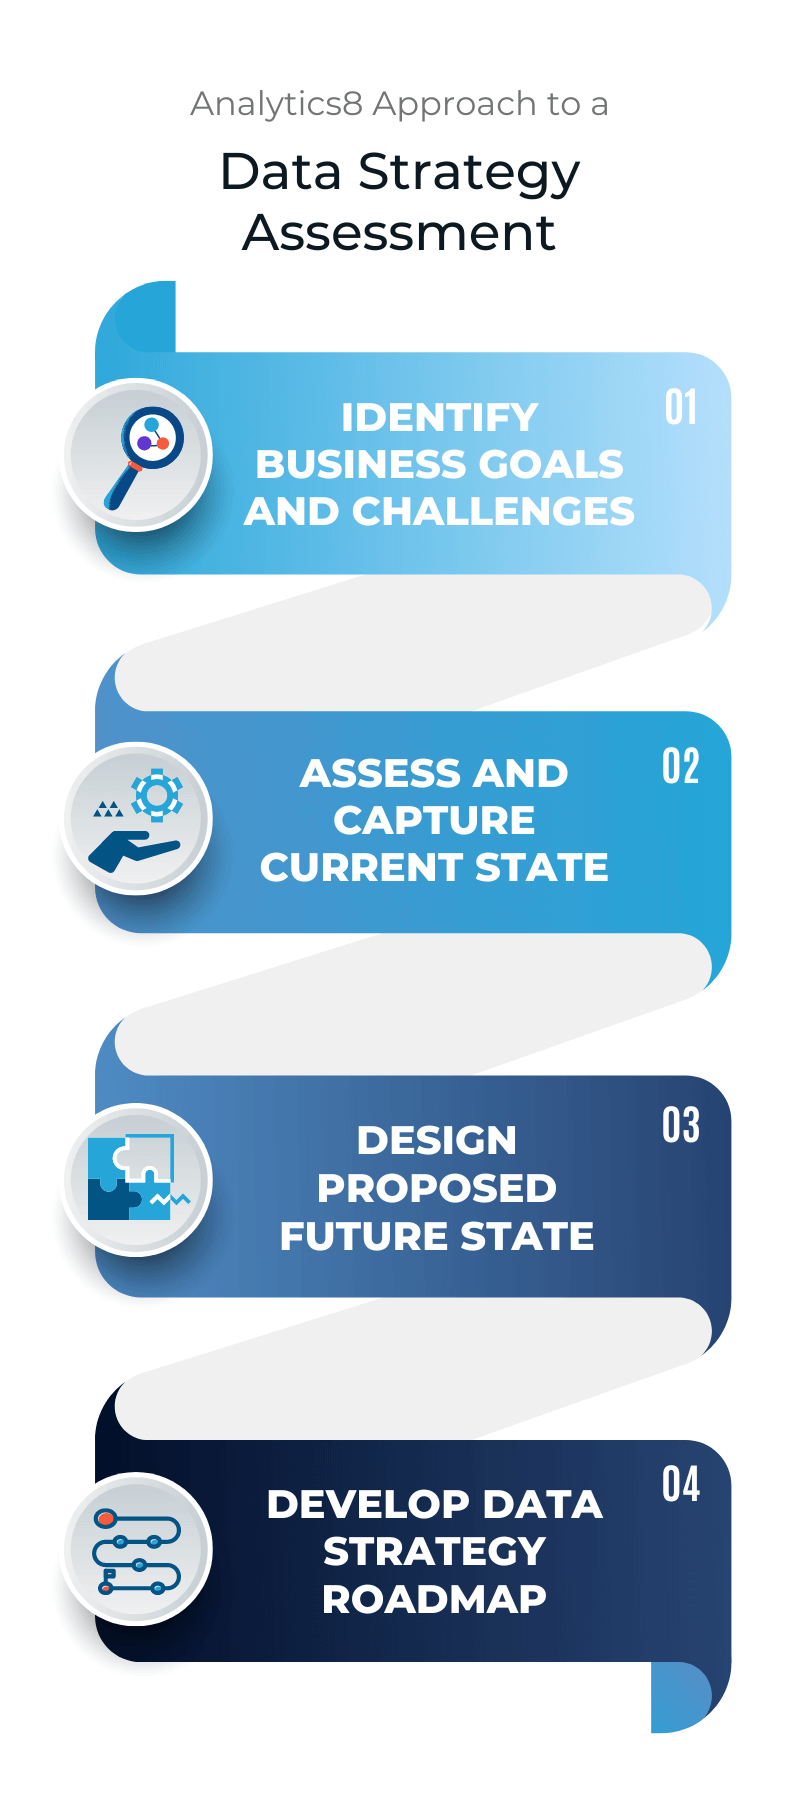 White and blue graphic illustrating a four-step approach to data strategy assessment, includes understanding business goals, capturing current state, designing future state, and building a data strategy roadmap.